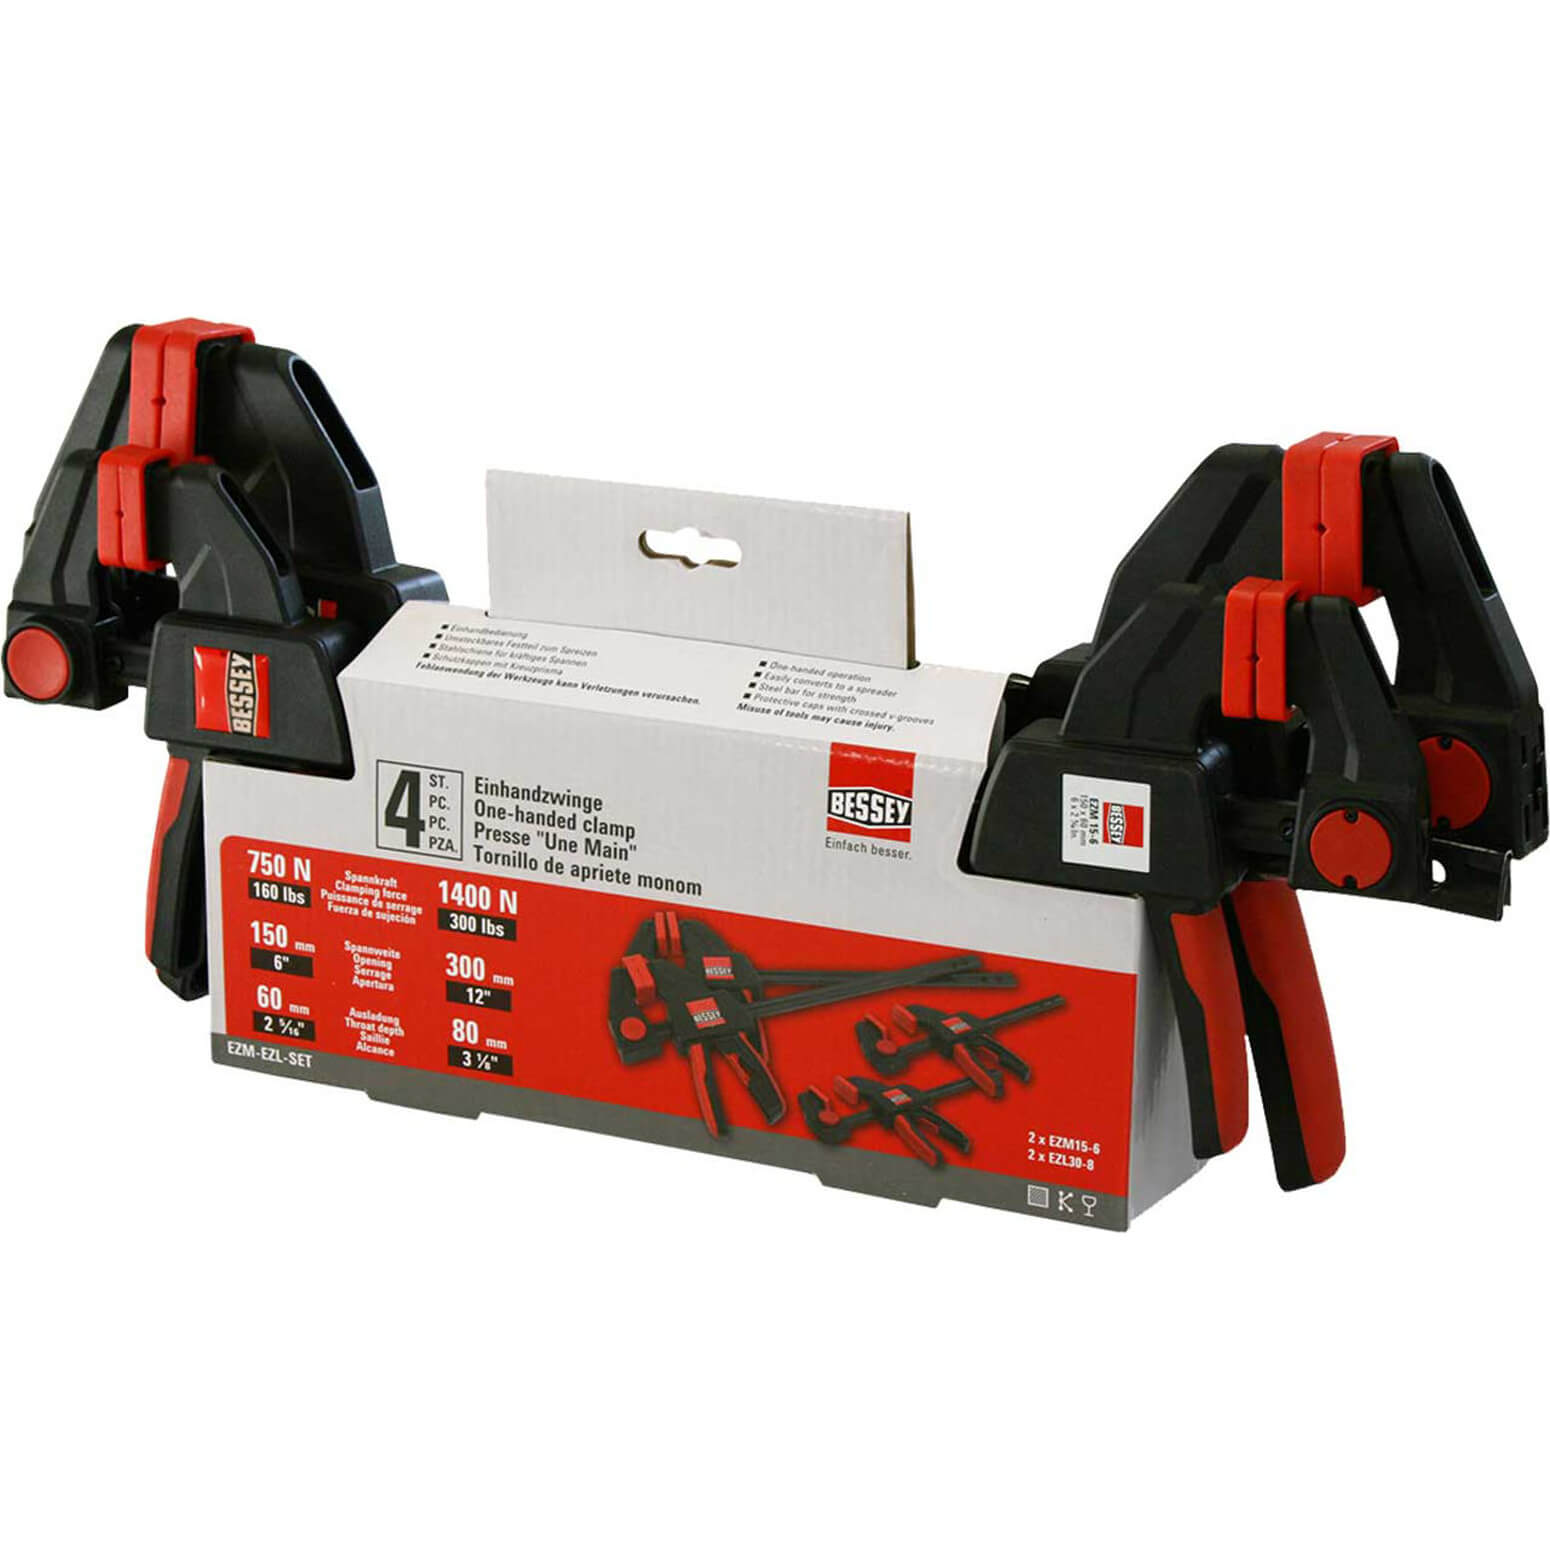 Photo of Bessey Ezm Ezl 4 Piece One Handed Quick Clamp Set